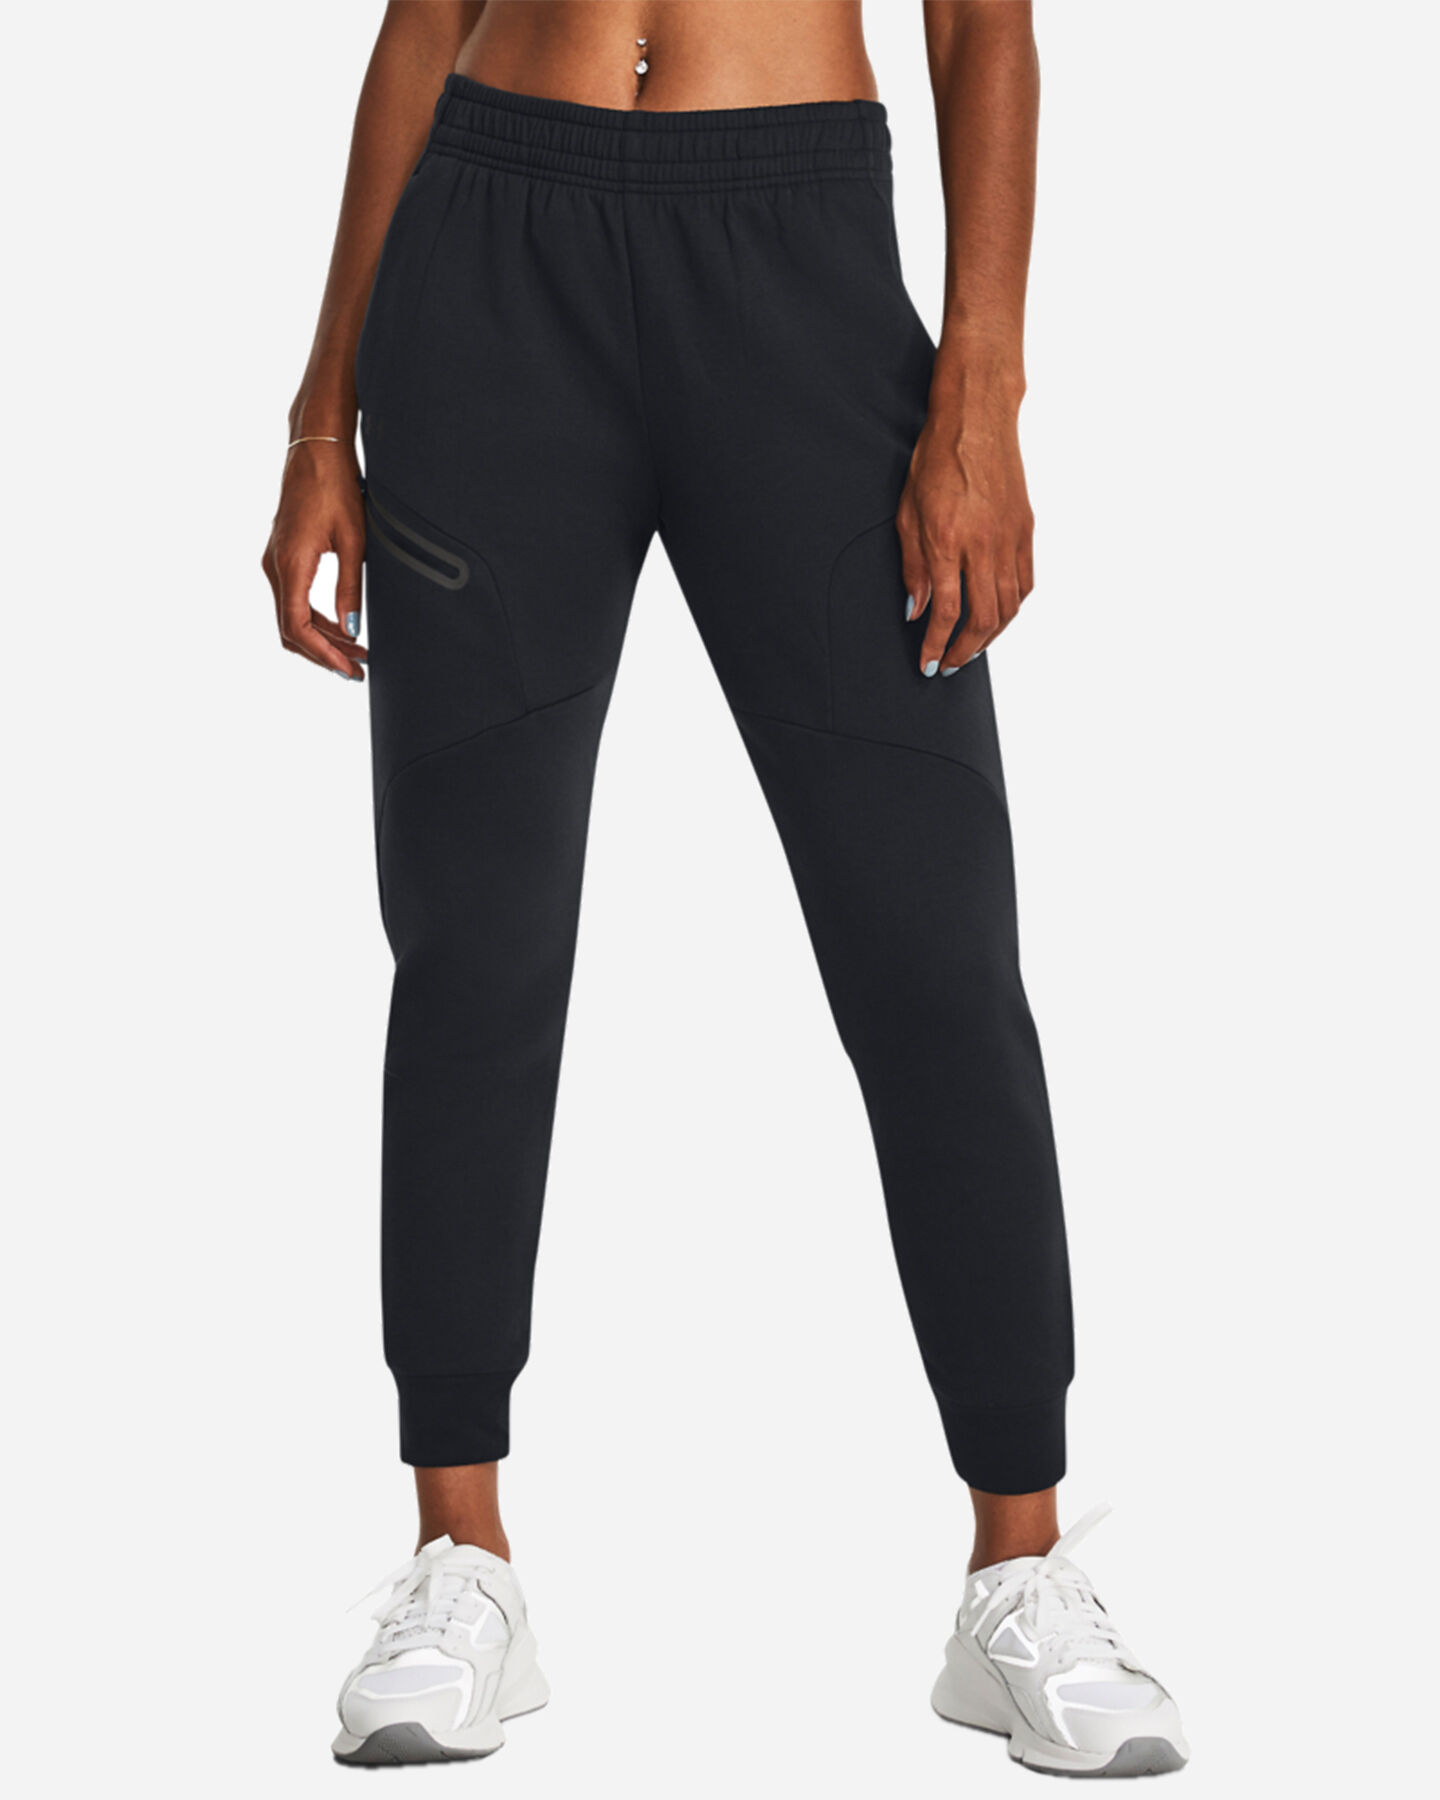  Pantalone UNDER ARMOUR UNSTOPPABLE FLC W S5579700|0001|XS scatto 2